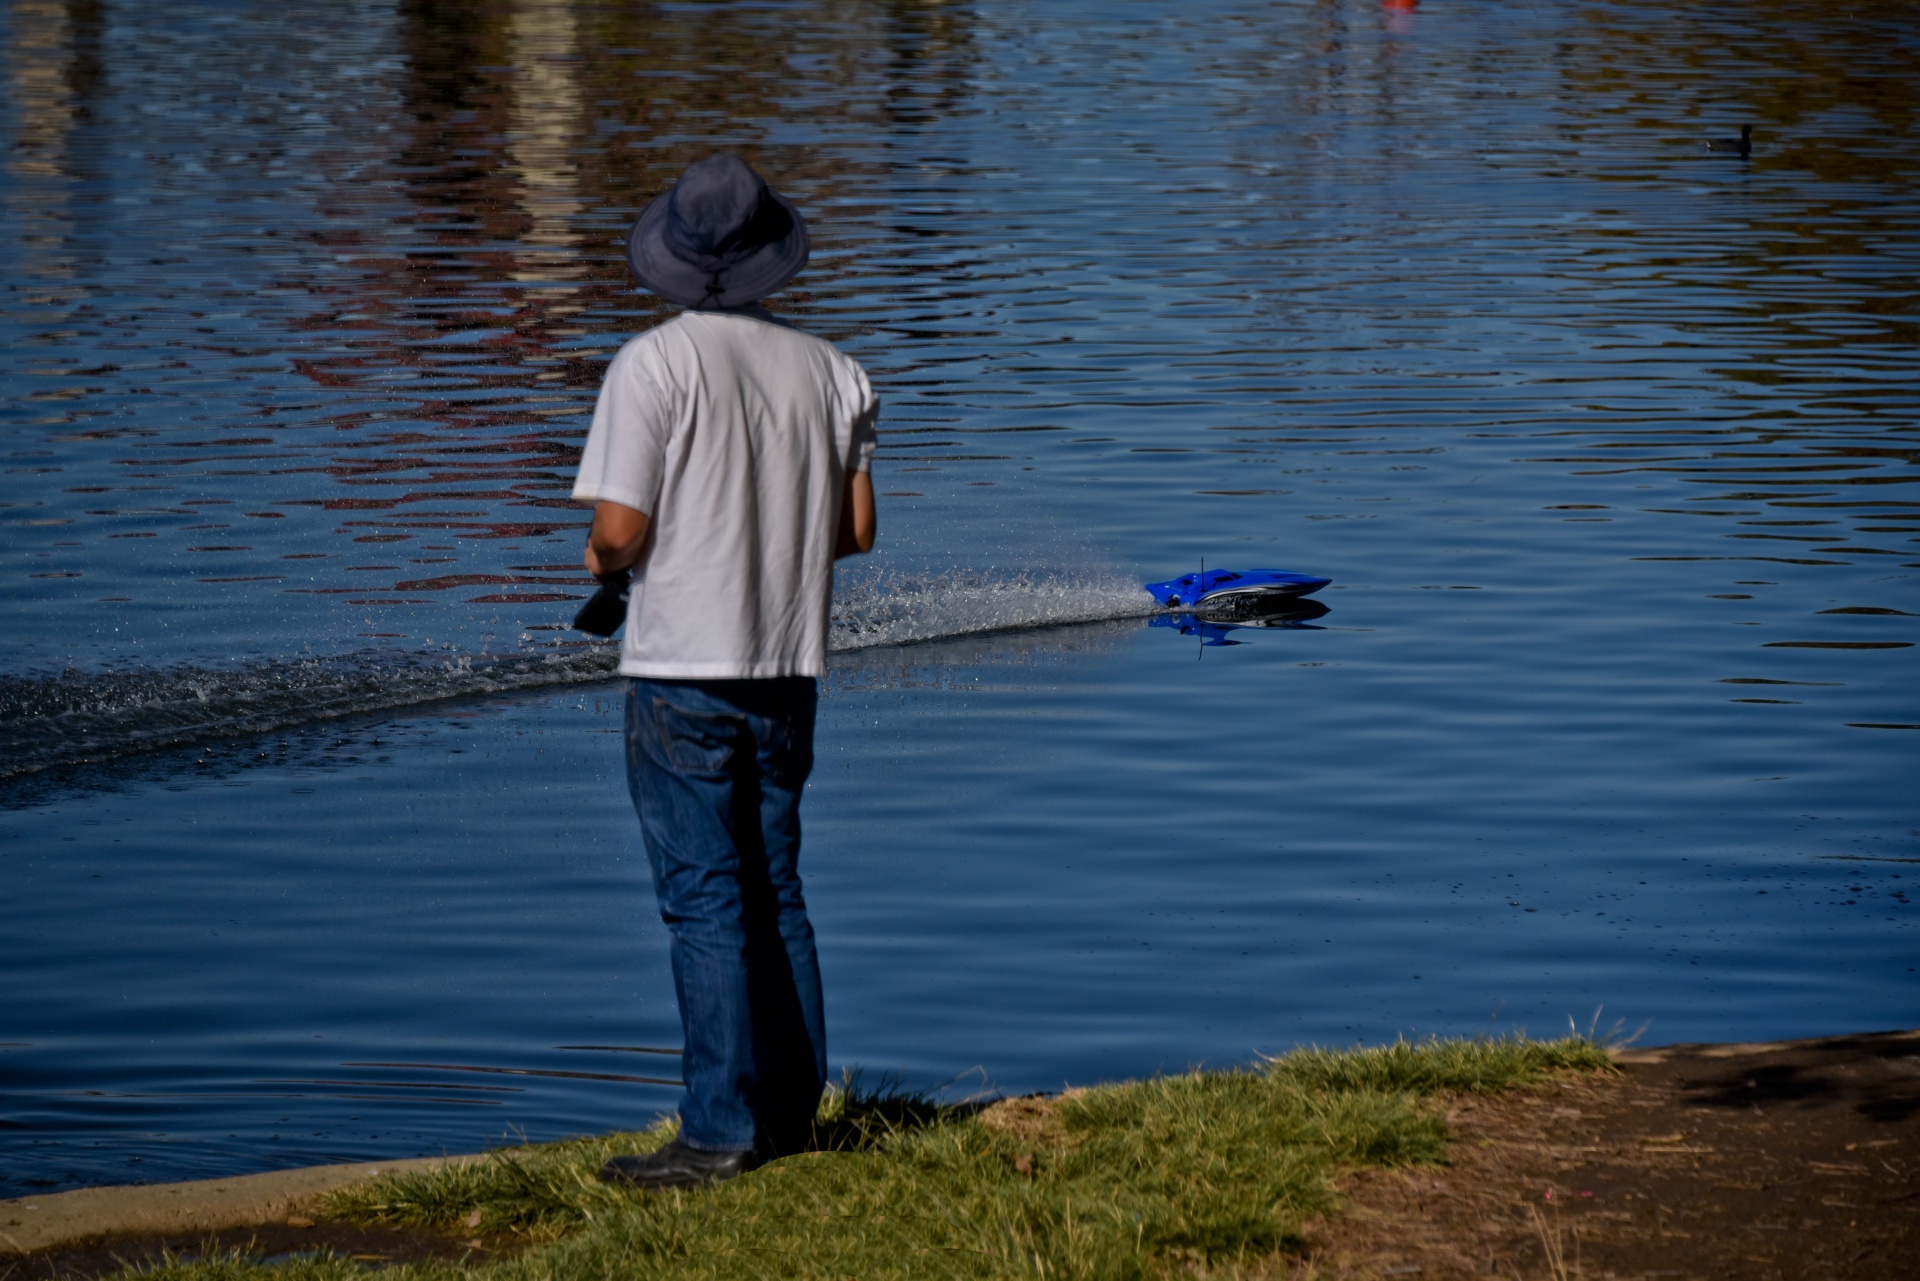 Man With Radio Controlled Boat